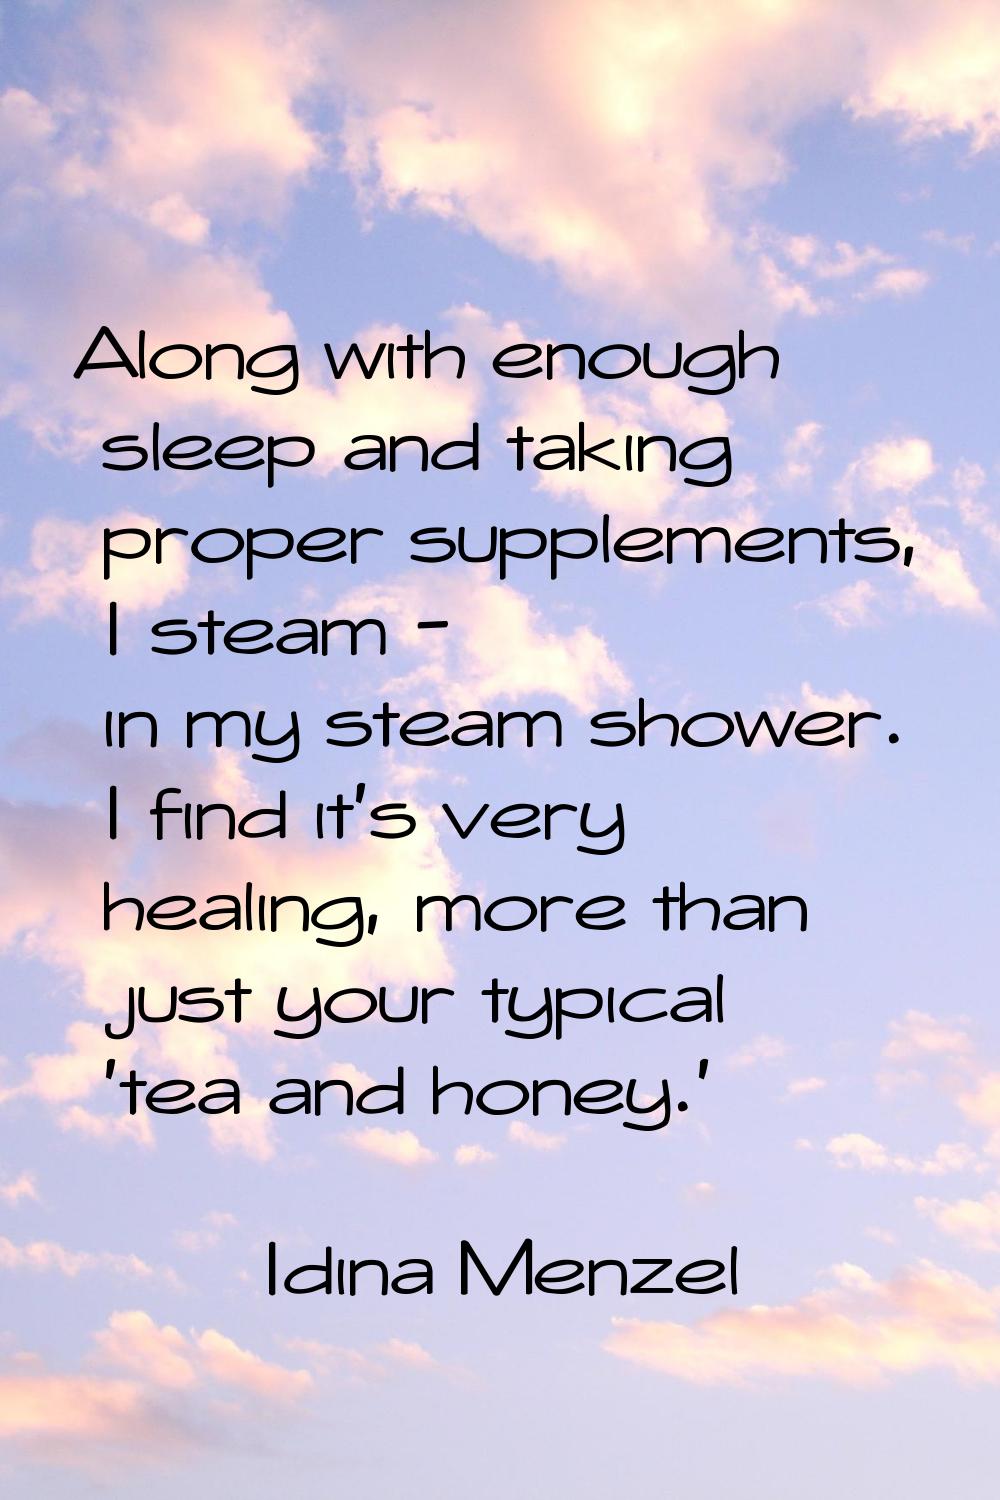 Along with enough sleep and taking proper supplements, I steam - in my steam shower. I find it's ve